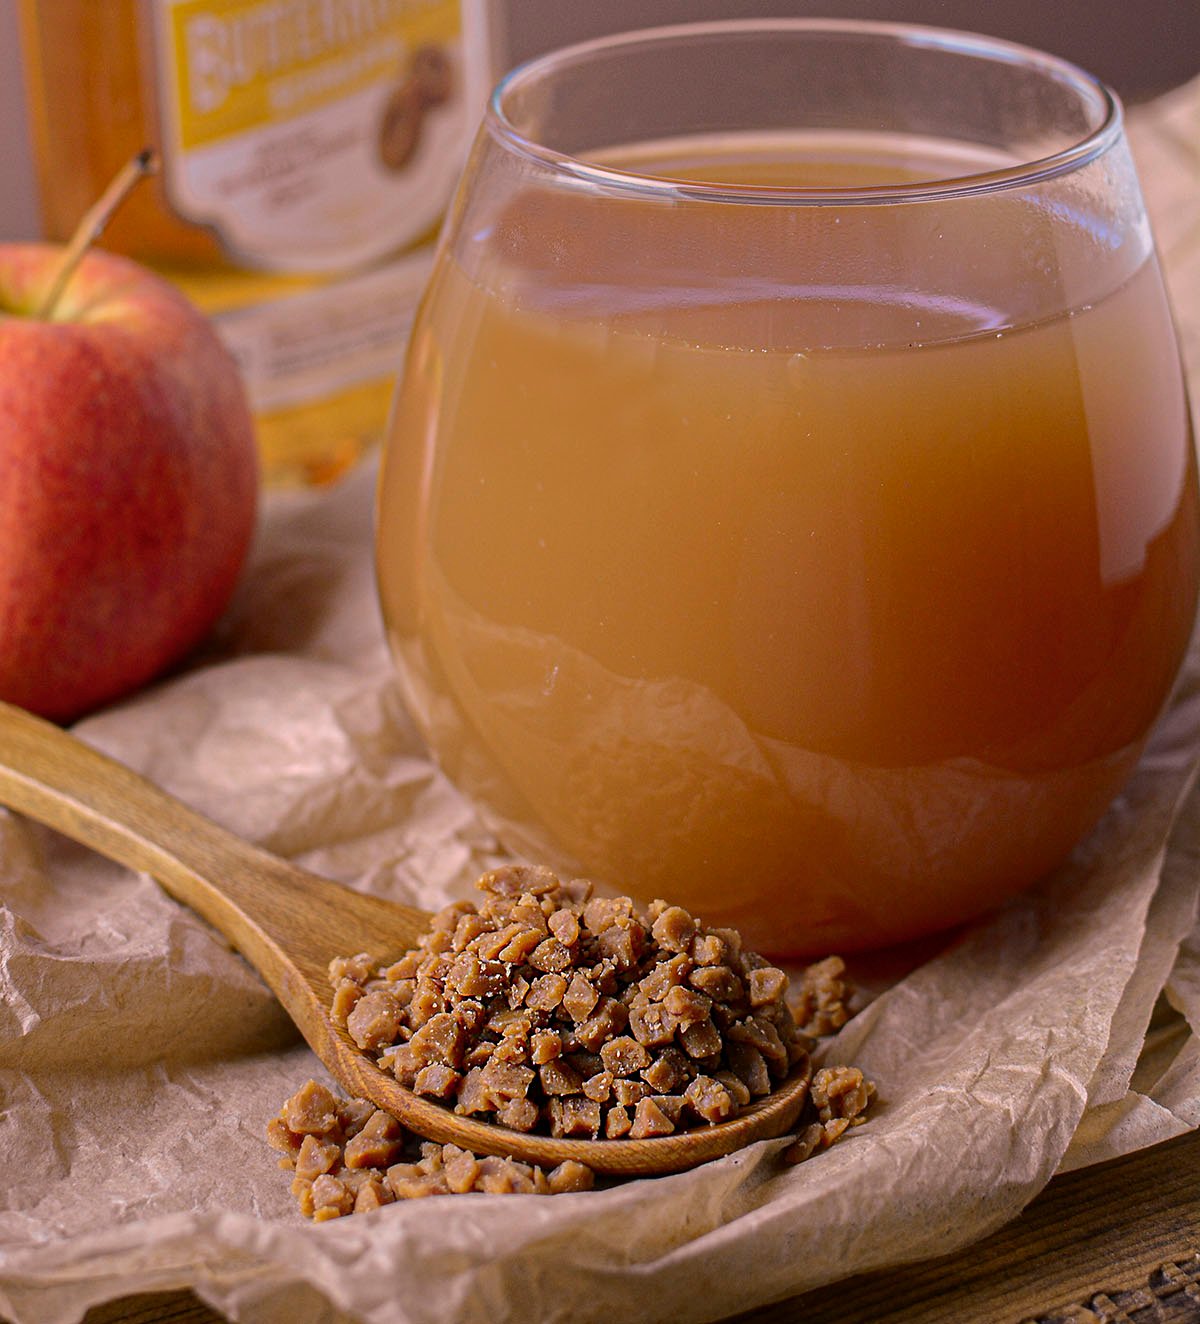 A large glass of toffee apple cider with a spoon full of toffee bits in front of the glass.